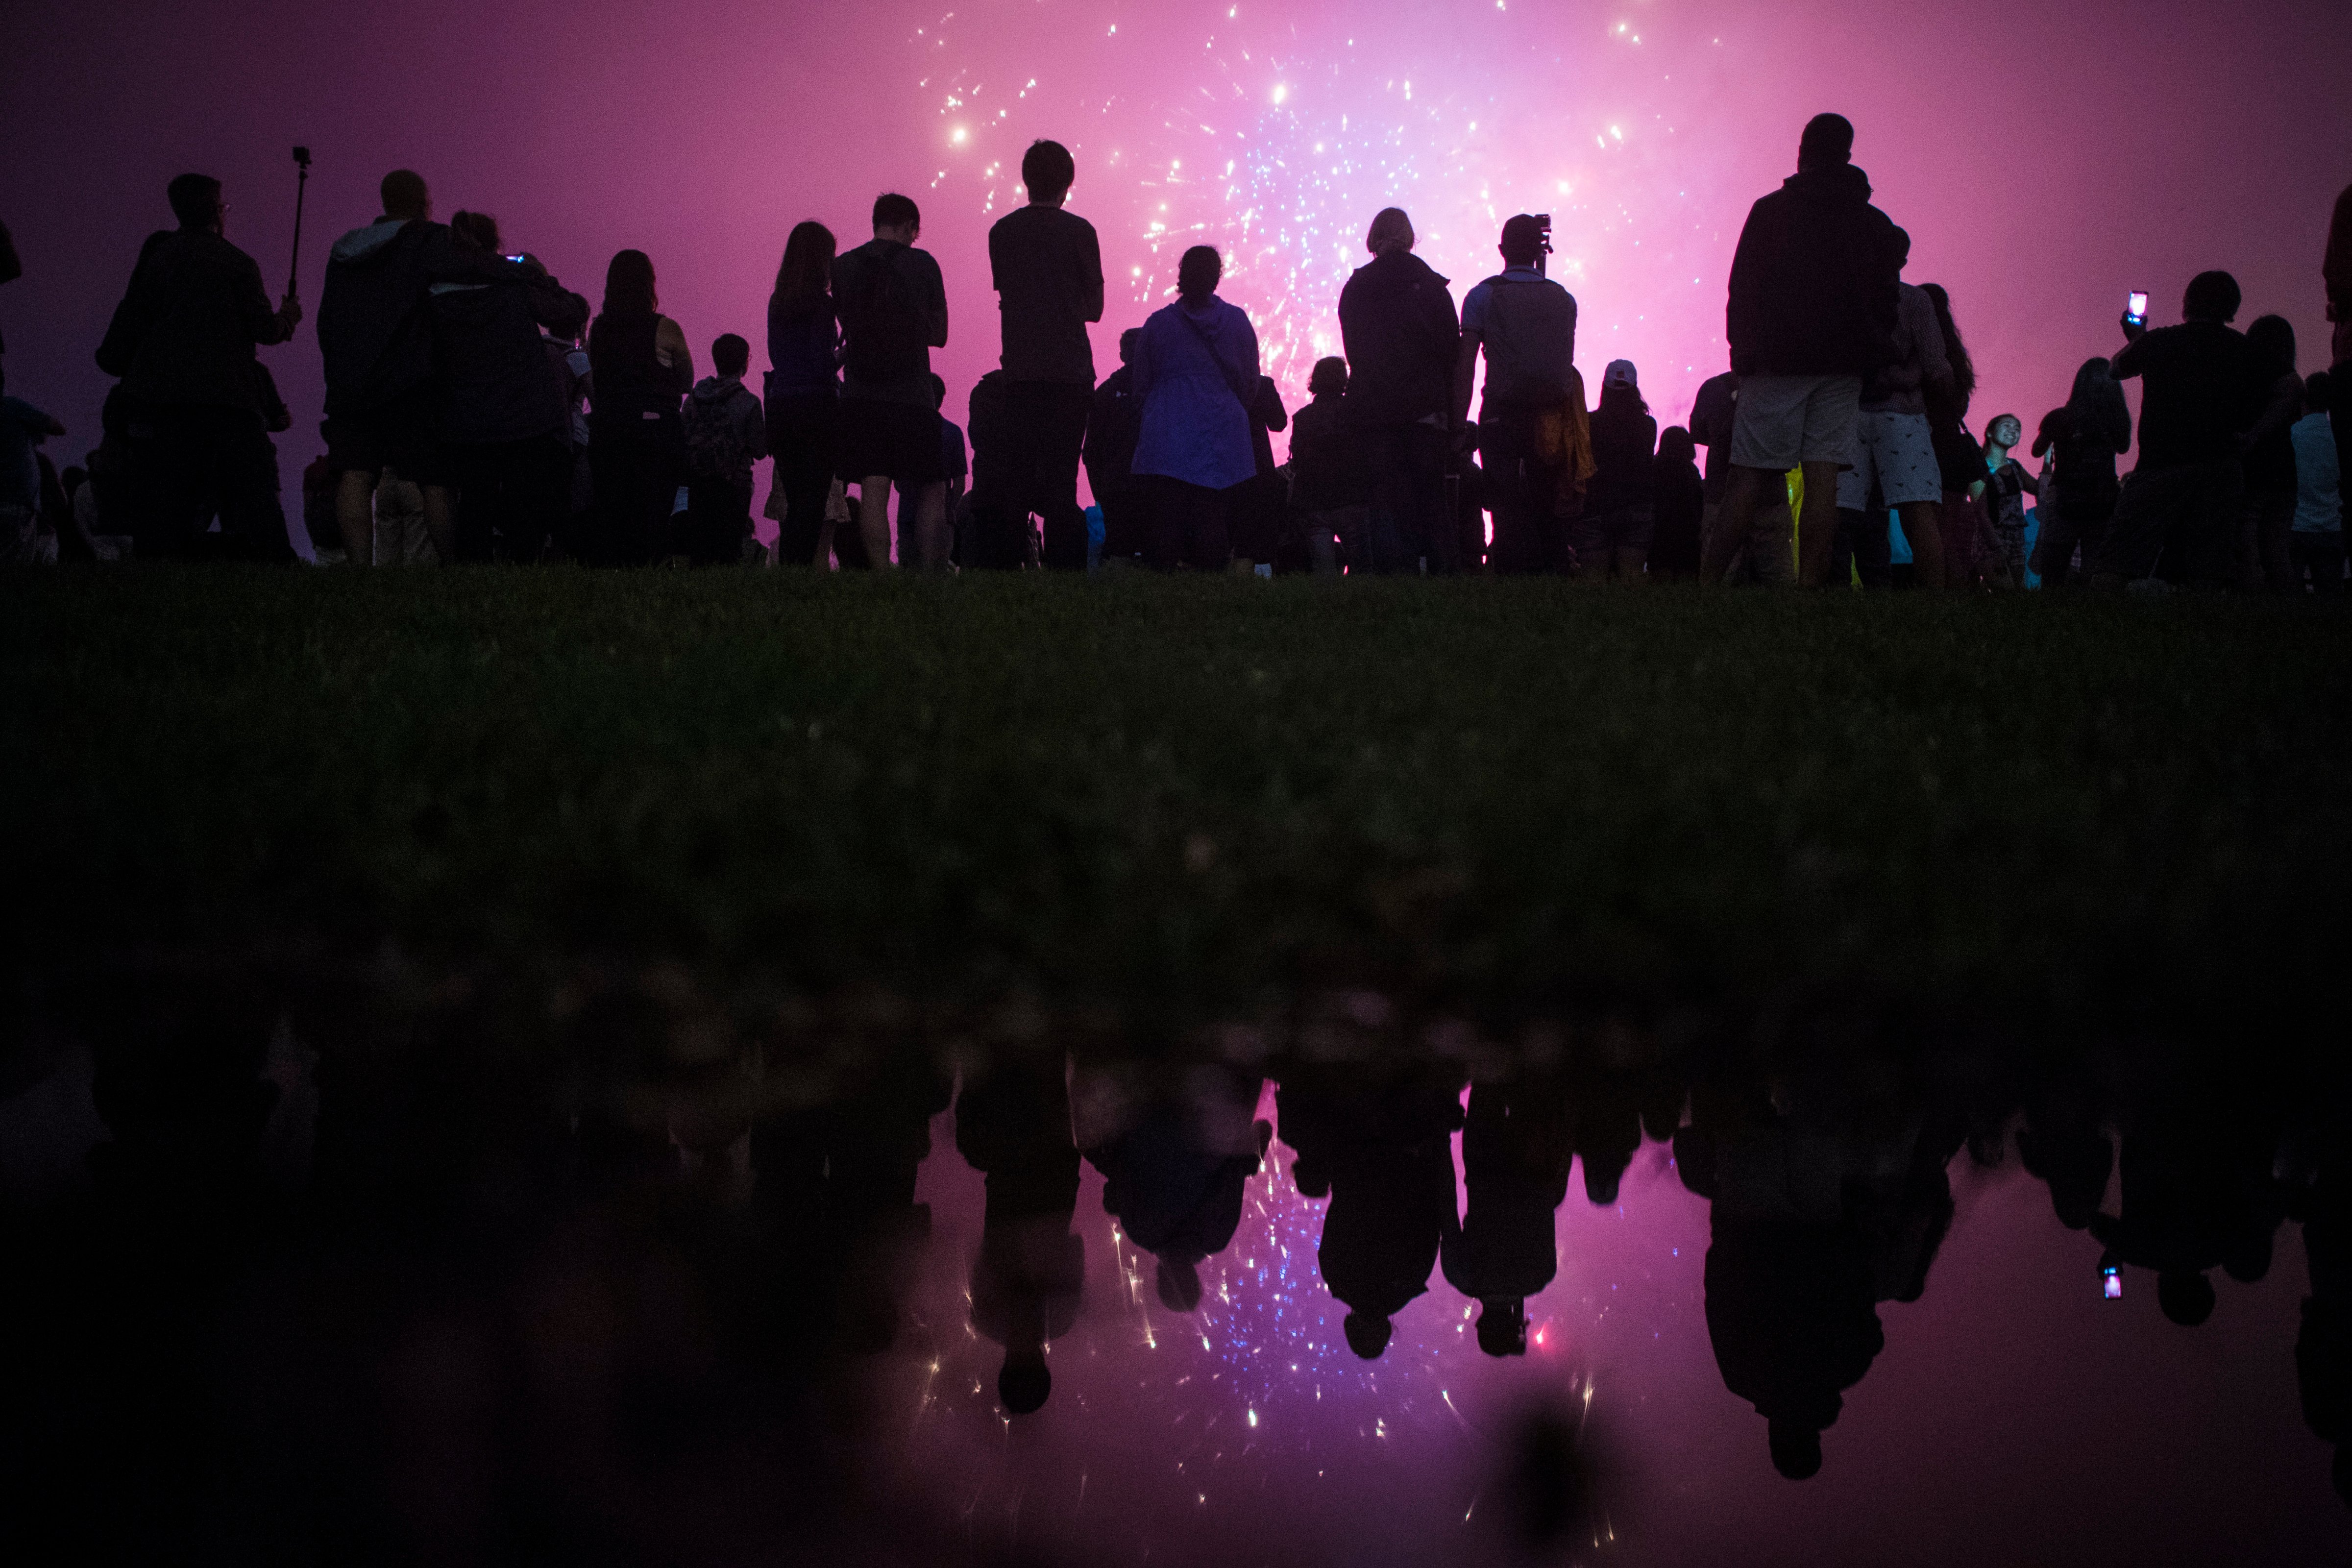 WASHINGTON, DC - JULY 4: Patrons, reflected in a rain puddle, watch near the Washington Monument as the Independence Day fireworks go off on the National Mall in Washington, DC on Monday July 04, 2016. (Photo by Jabin Botsford/The Washington Post via Getty Images) (The Washington Post—Getty Images)